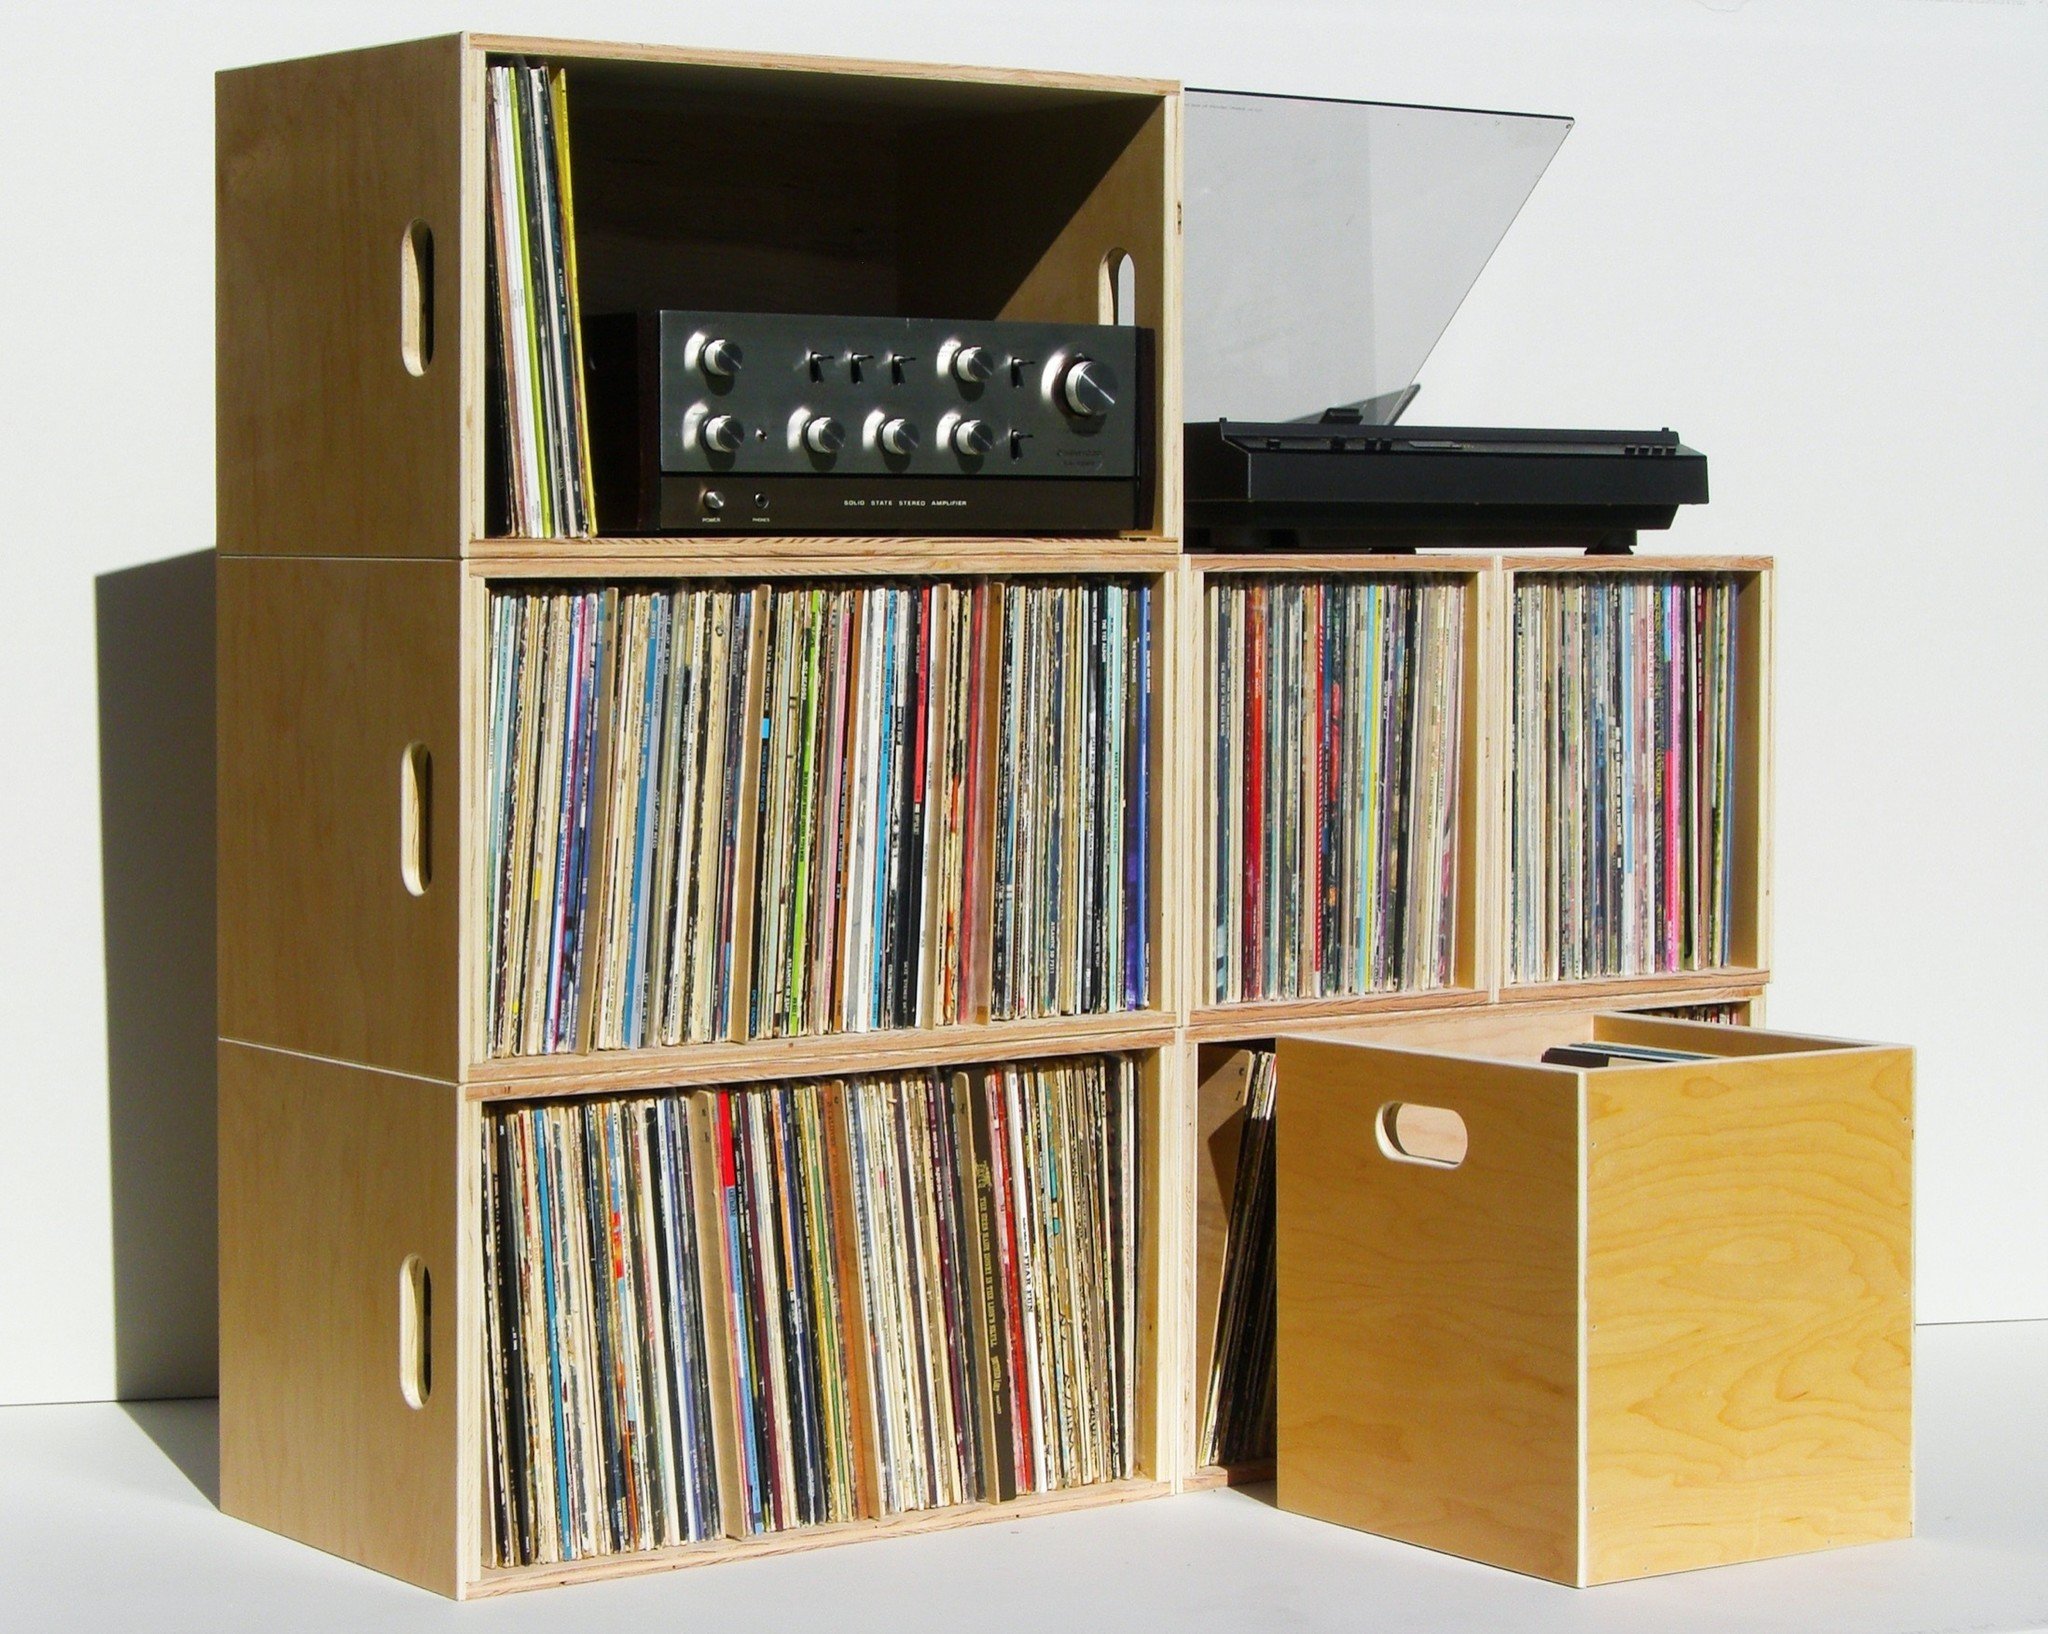 Olympia Record Crates